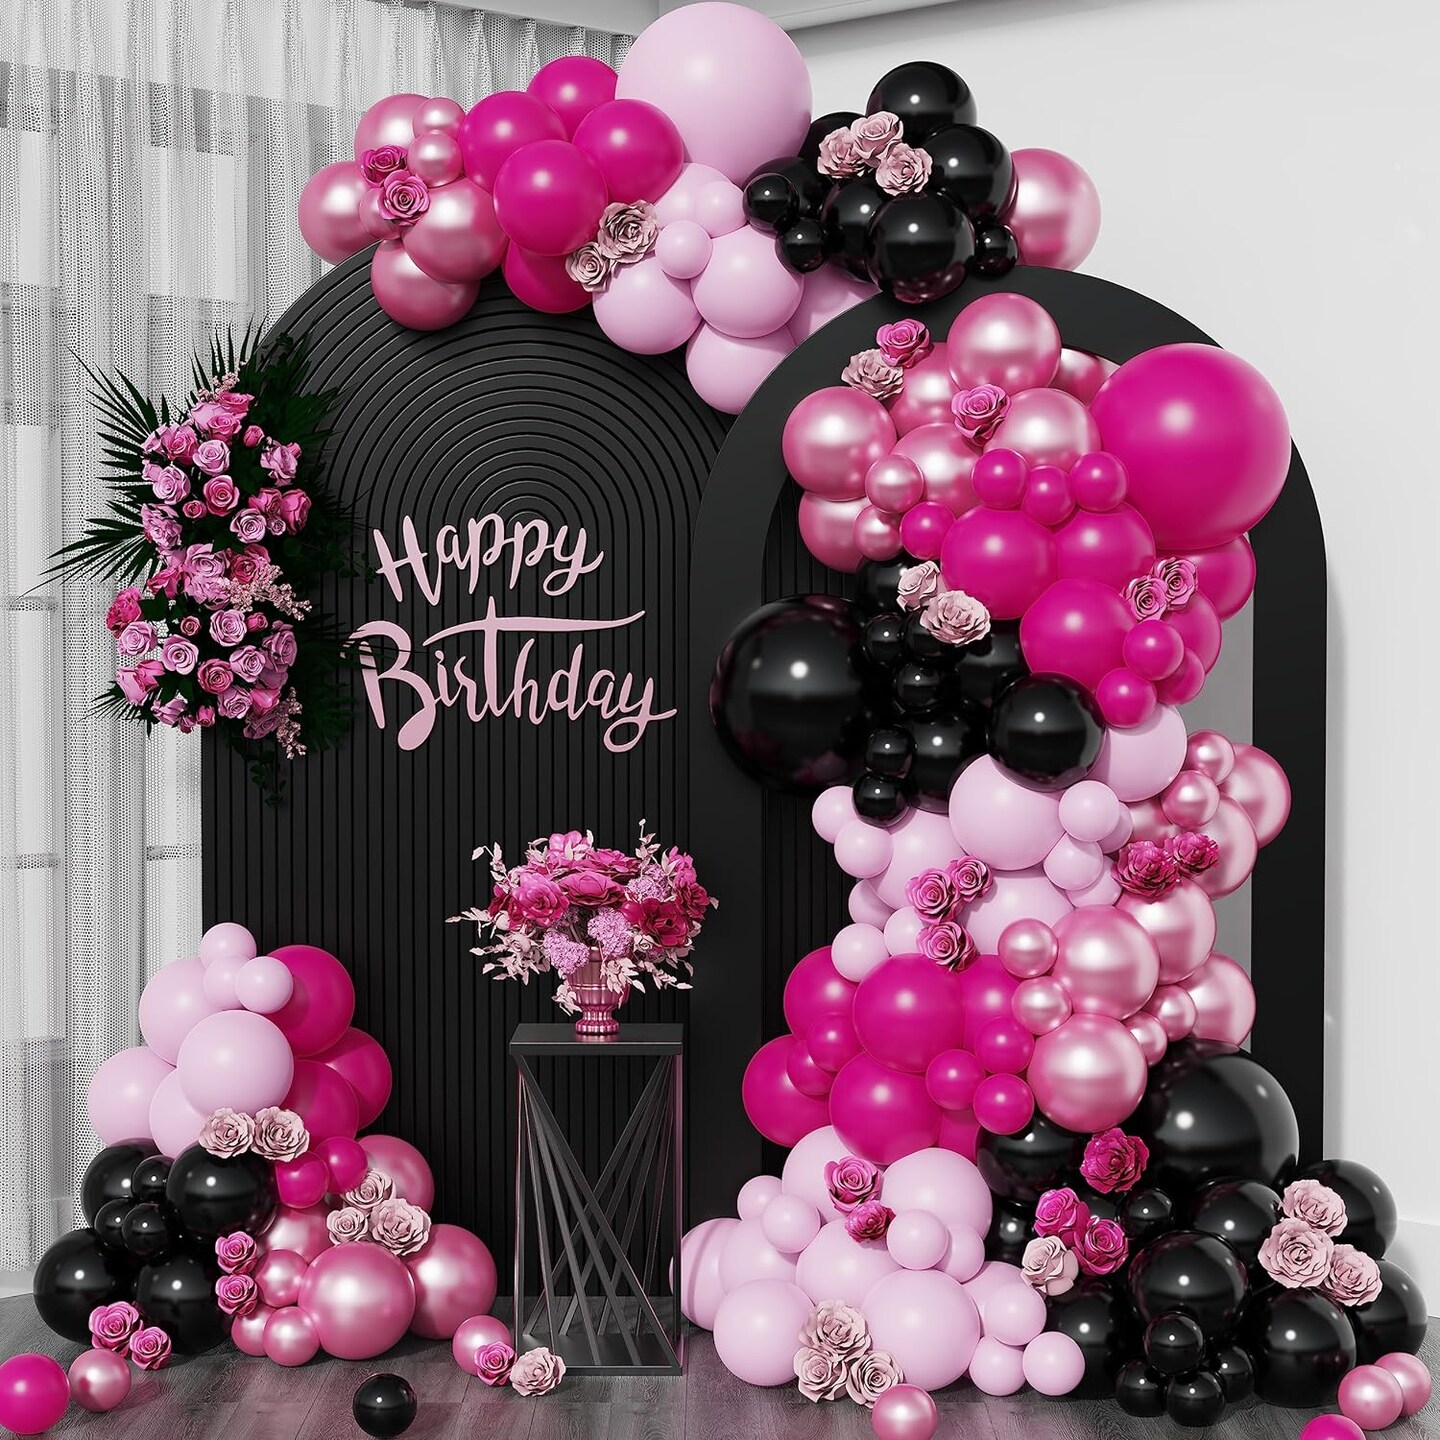 Pink and Black Balloon Garland Arch Kit, 153pcs Black Magenta Baby Pink and Chrome Pink Balloons for Girls Birthday Decoration Sweet 16 Party Supplies Bridal Shower Graduation Decor (Pink)